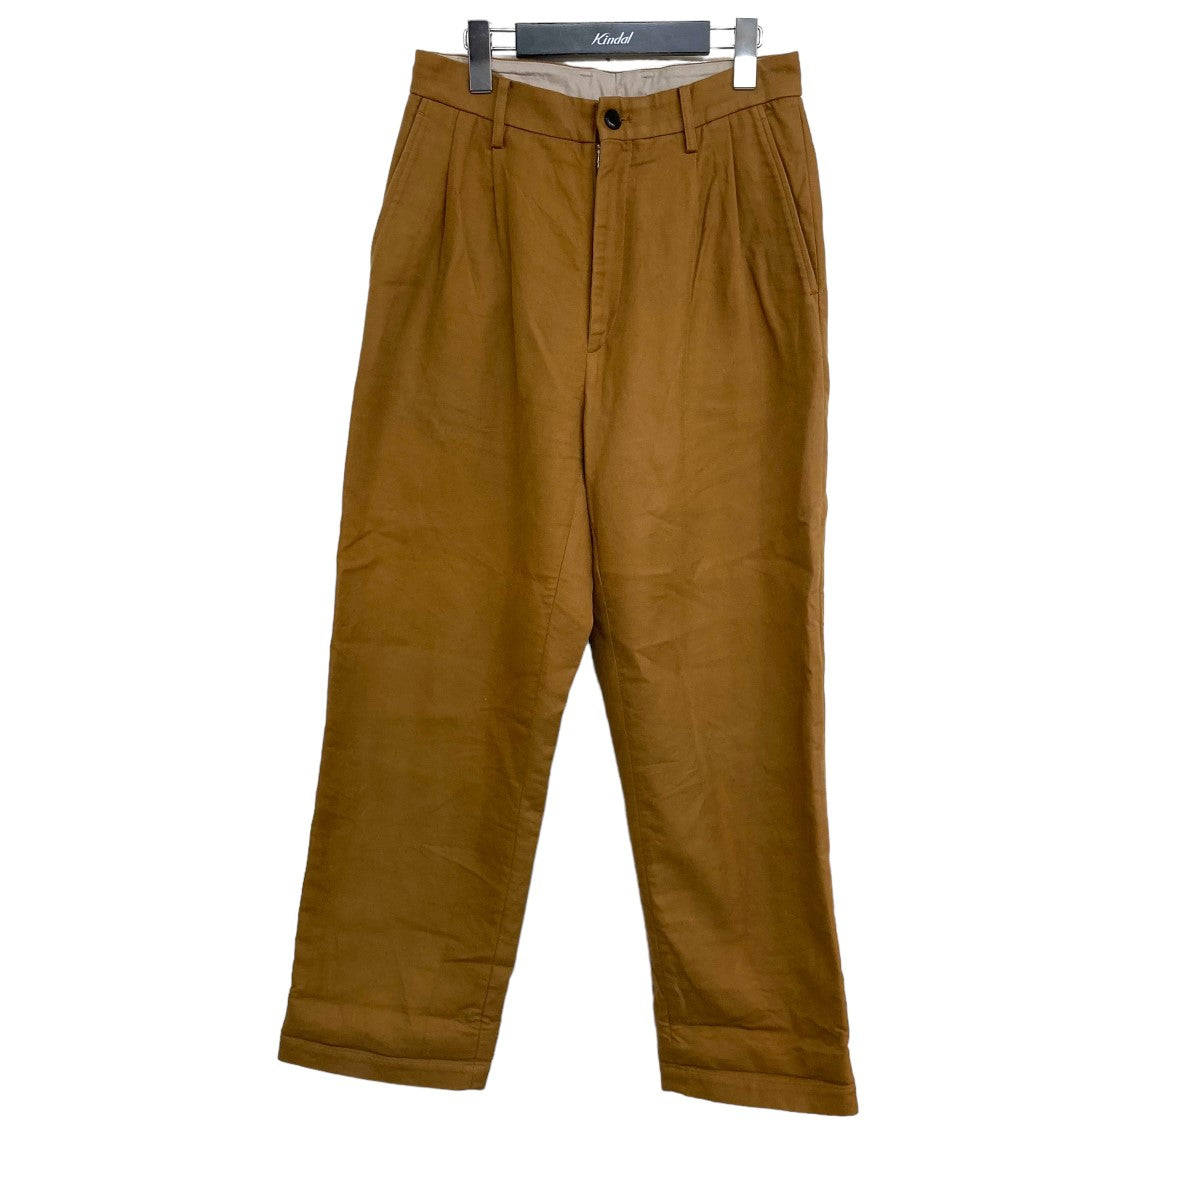 UNIVERSAL PRODUCTS．(ユニバーサルプロダクツ) 「2 TUCK WIDE CHINO 